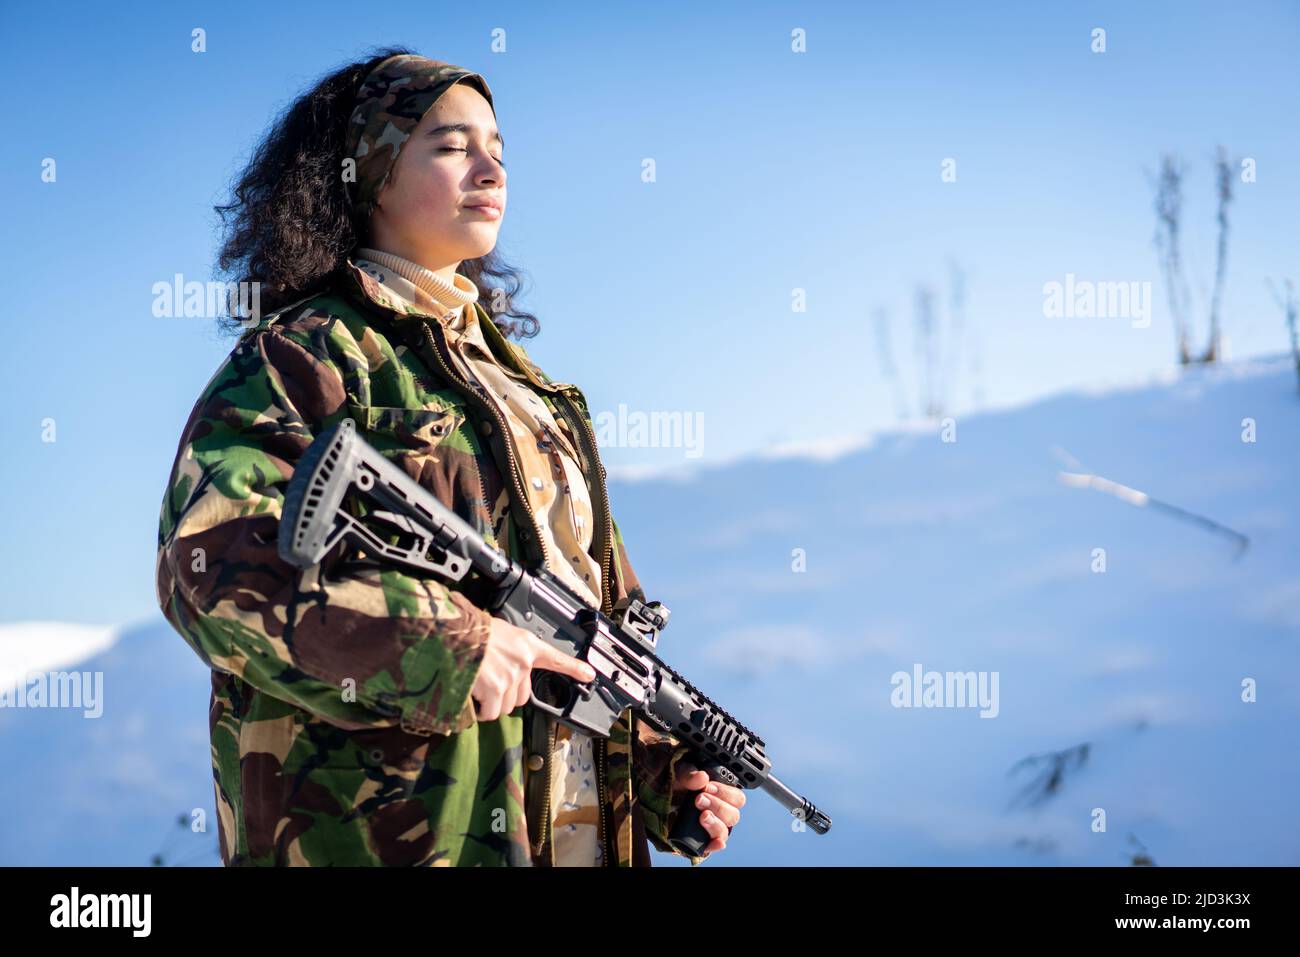 Young Female Soldier In Military Uniform On Winter Snow. High quality photo Stock Photo